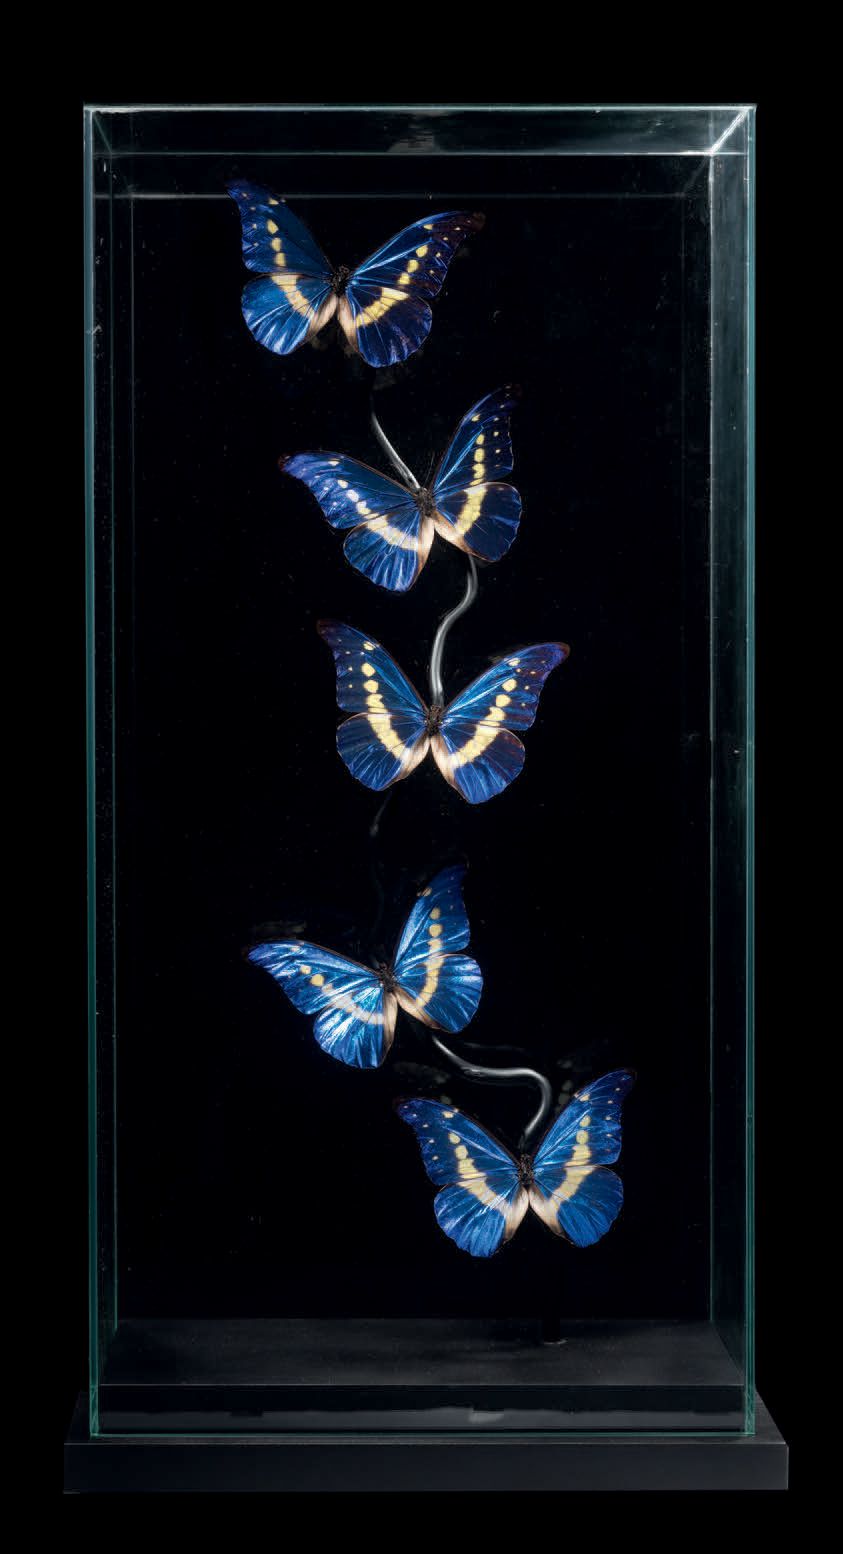 Null Butterfly composition
Morpho helena
H. 29 17/32 in - W. 5 17/32 in
This lep&hellip;